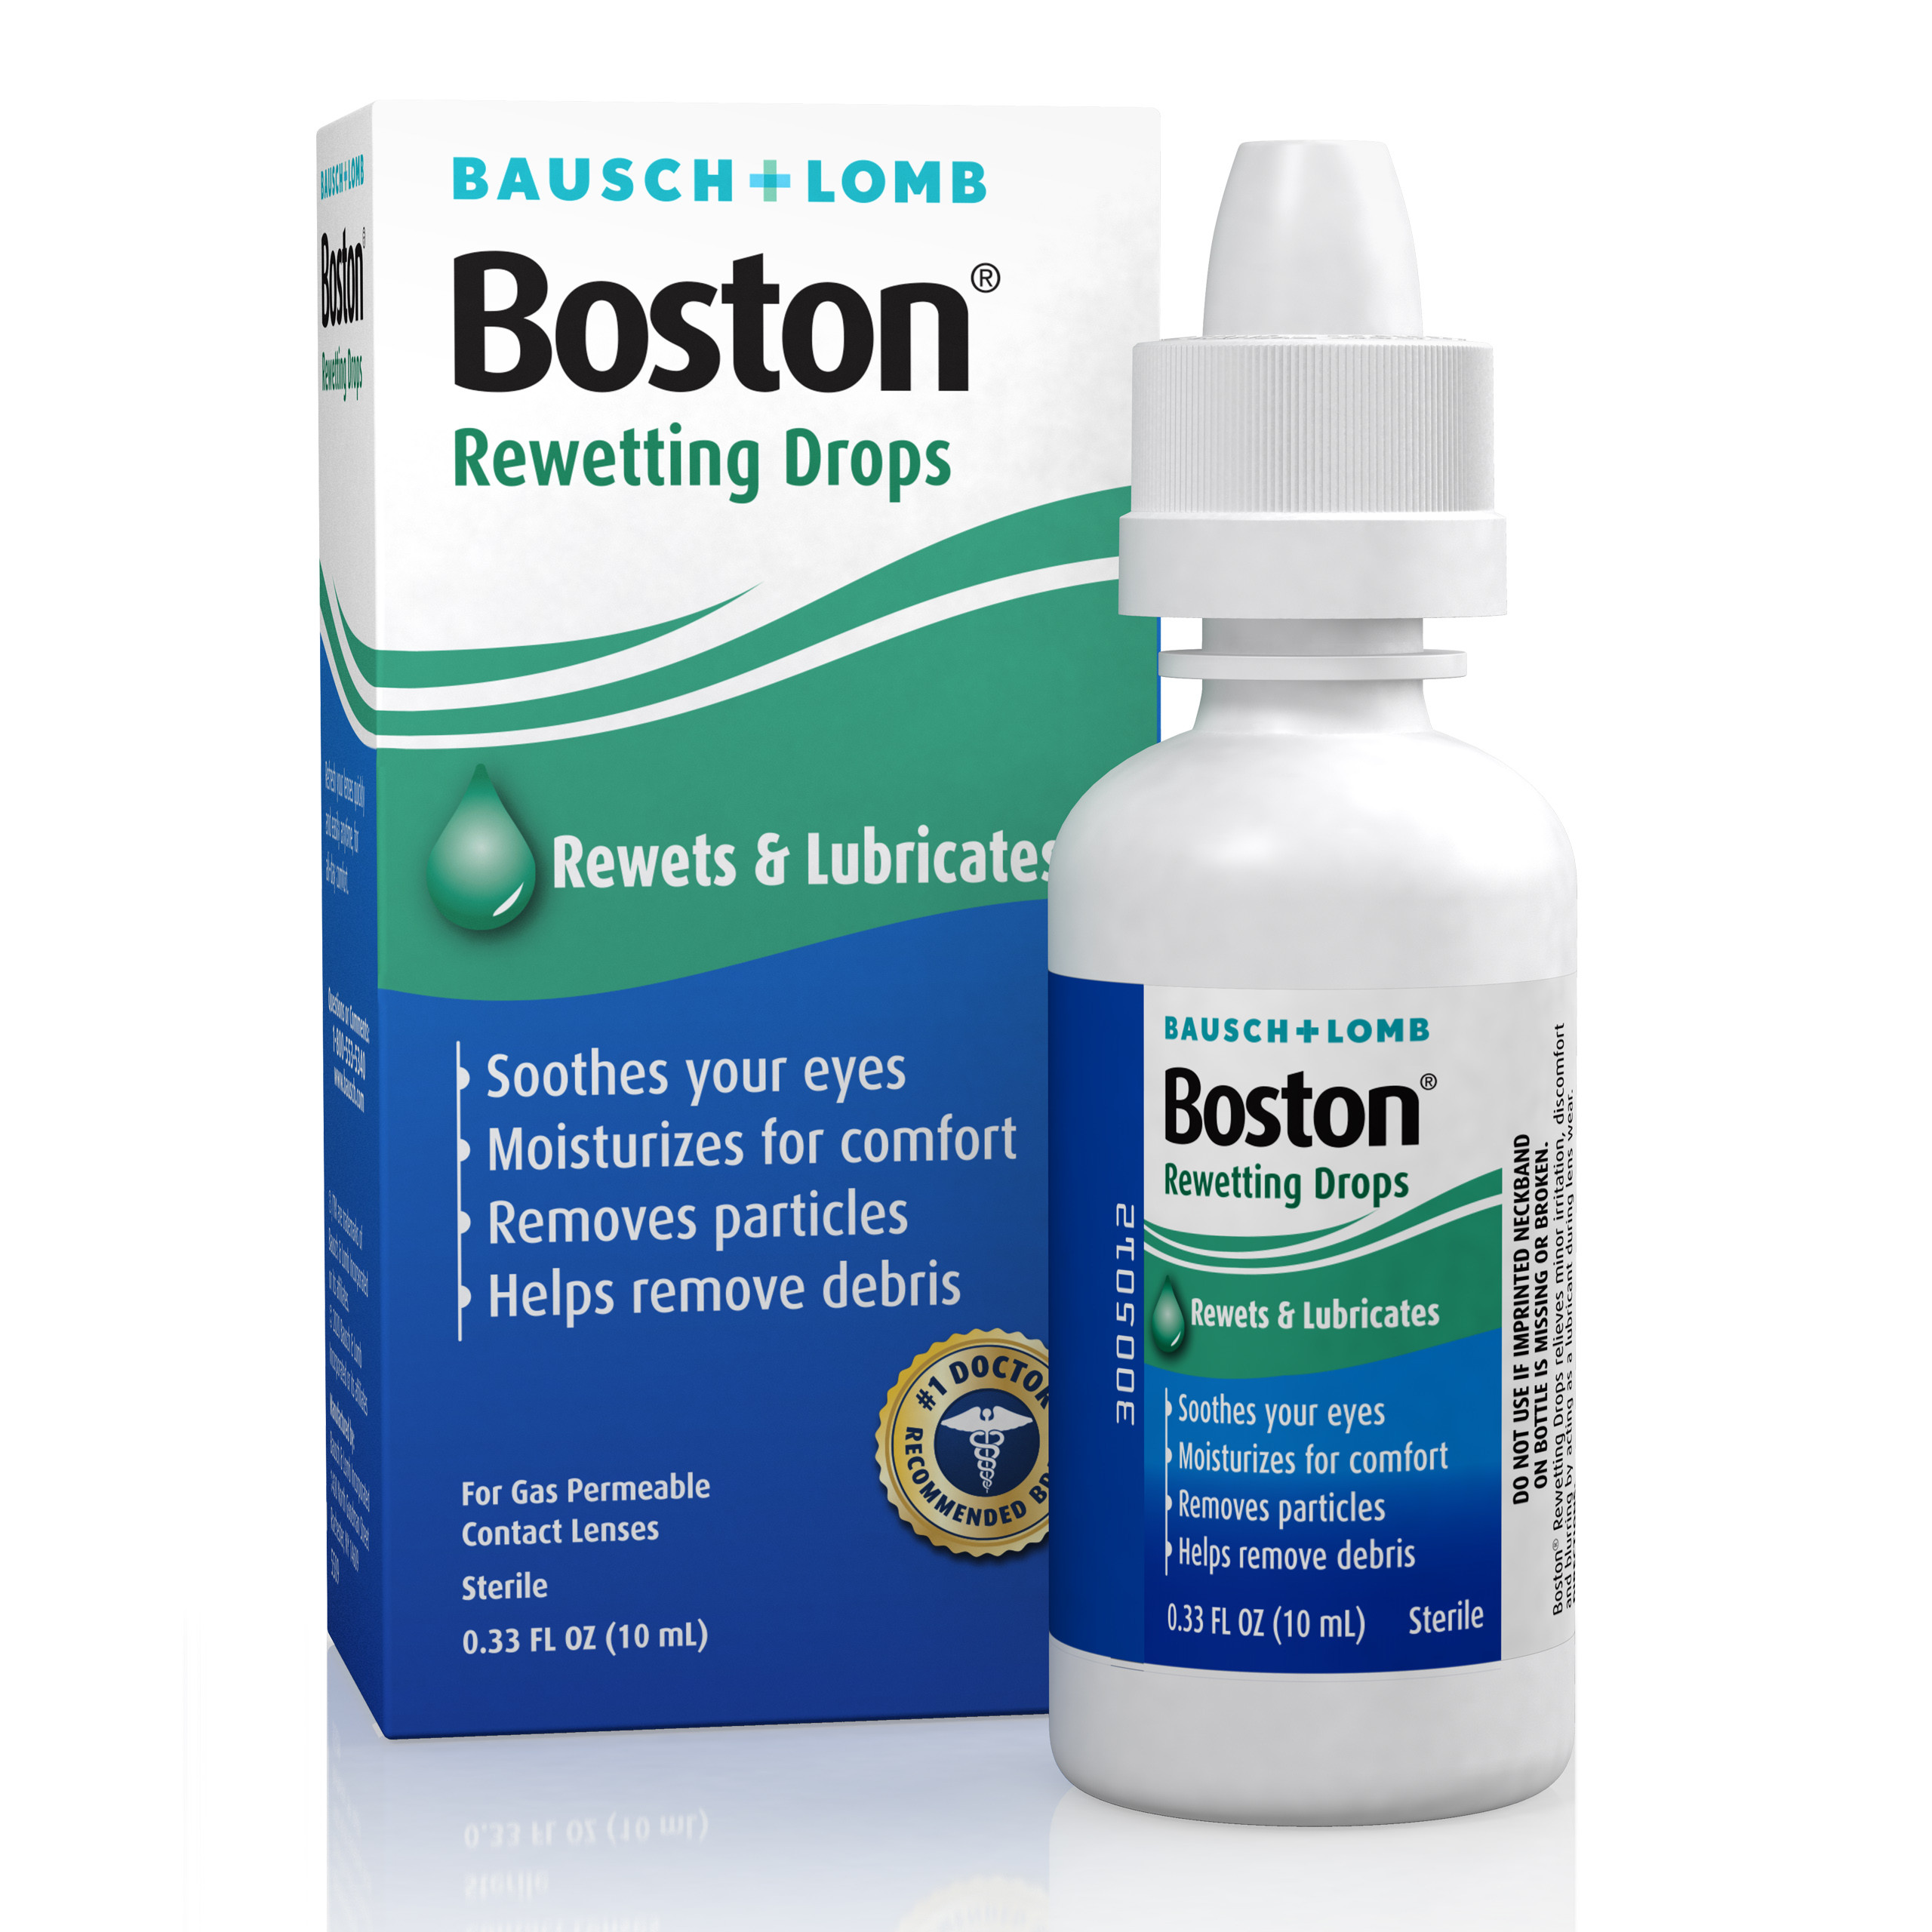 Boston® Rewetting Drops for Rigid Gas Permeable Contact Lenses - from Bausch + Lomb, 0.34 fl oz (10 mL) - image 1 of 8